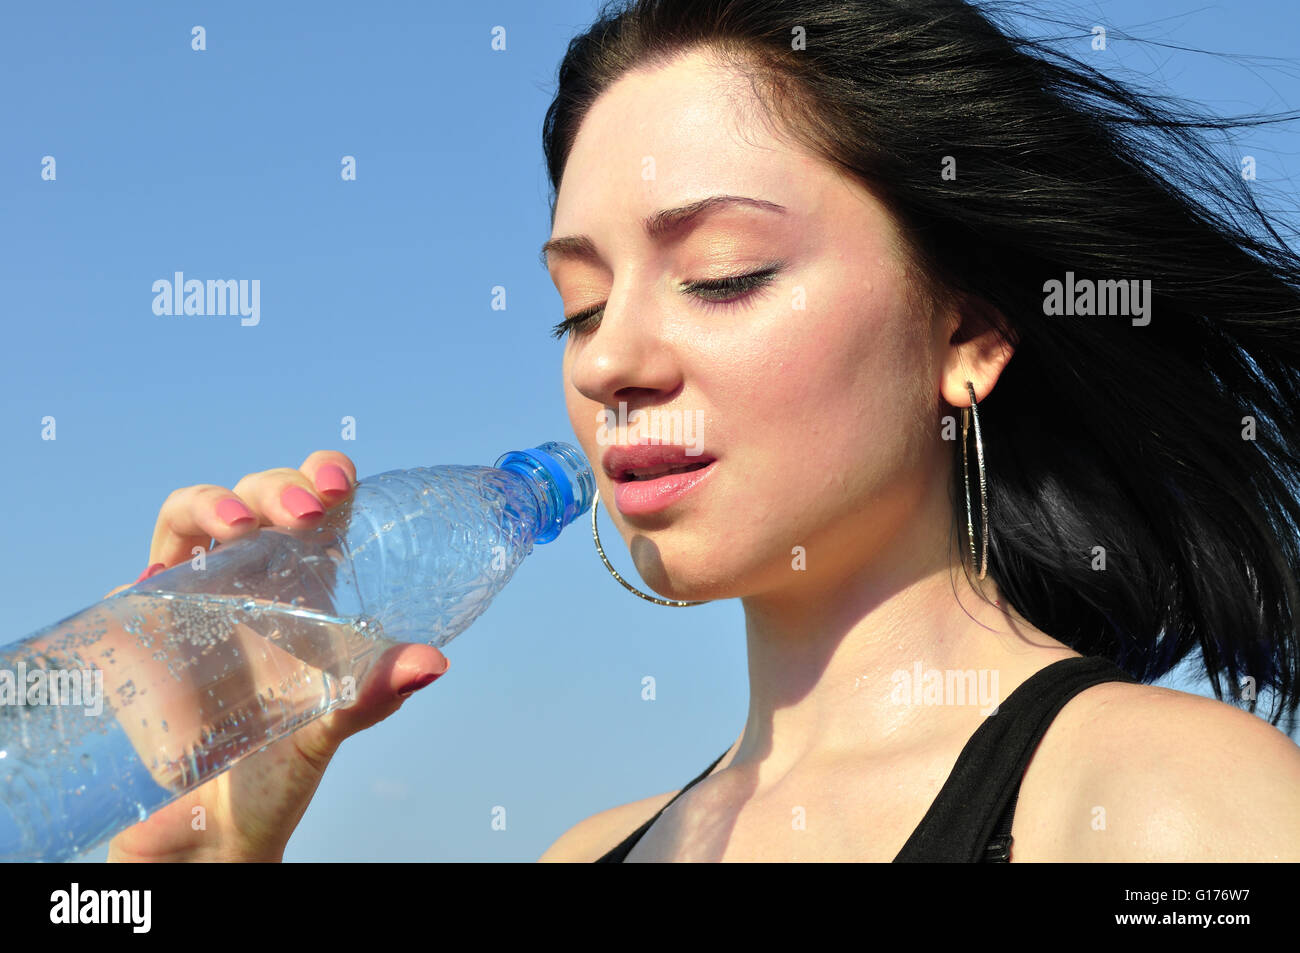 thirsty young woman drinking cold water Stock Photo